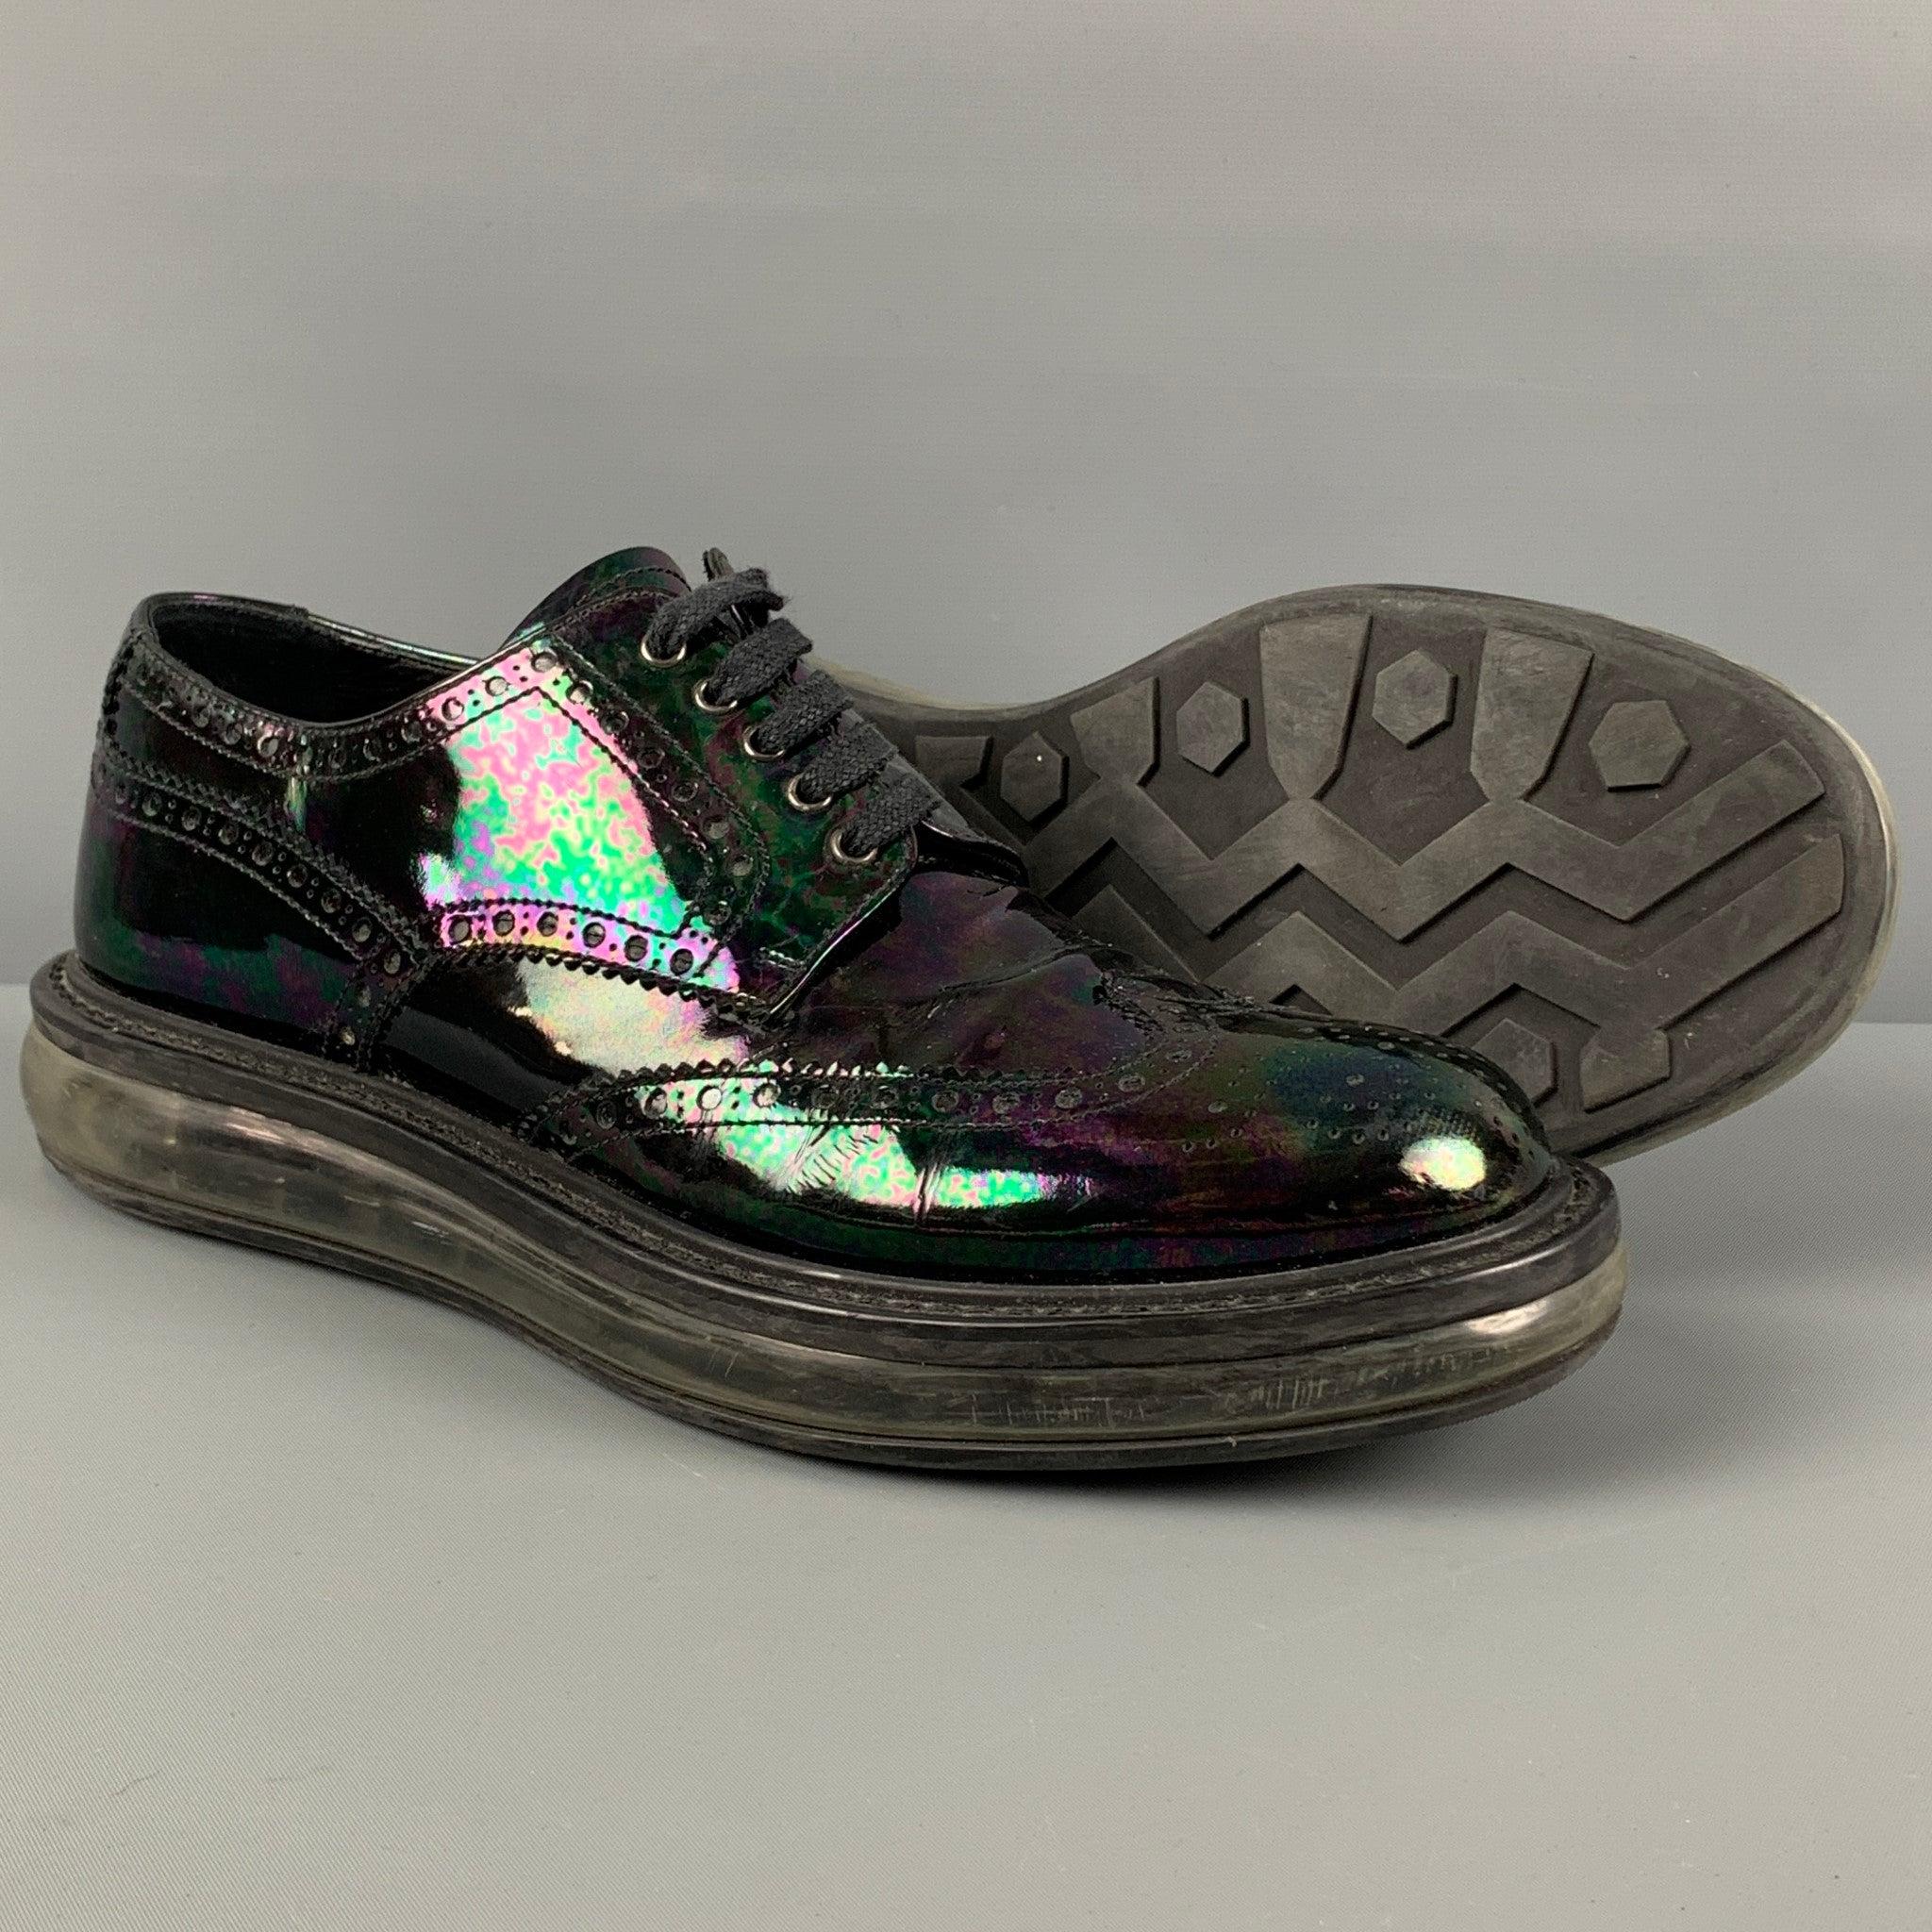 PRADA Size 7.5 Black Iridescent Leather Platform Lace Up Shoes In Good Condition For Sale In San Francisco, CA